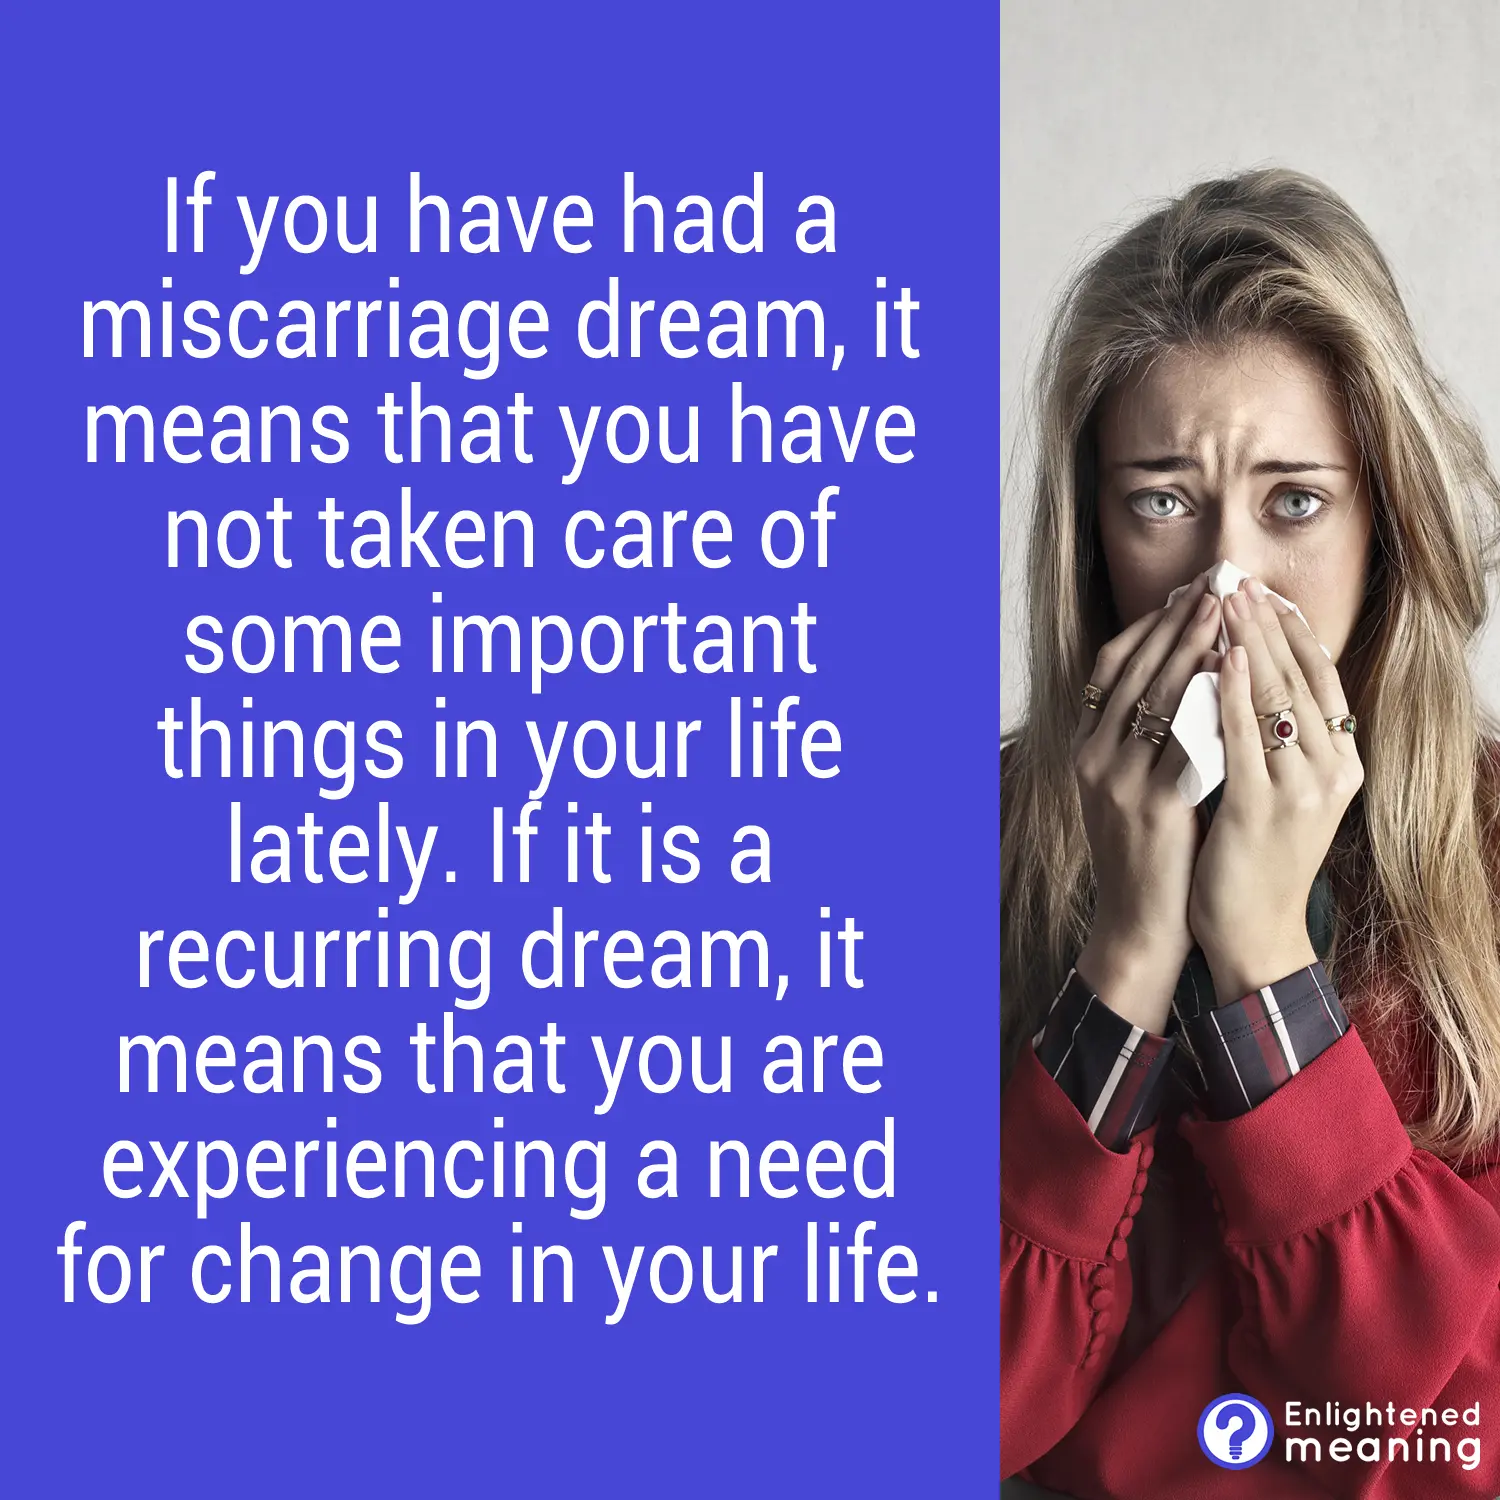 Spiritual meaning of miscarriage in a dream